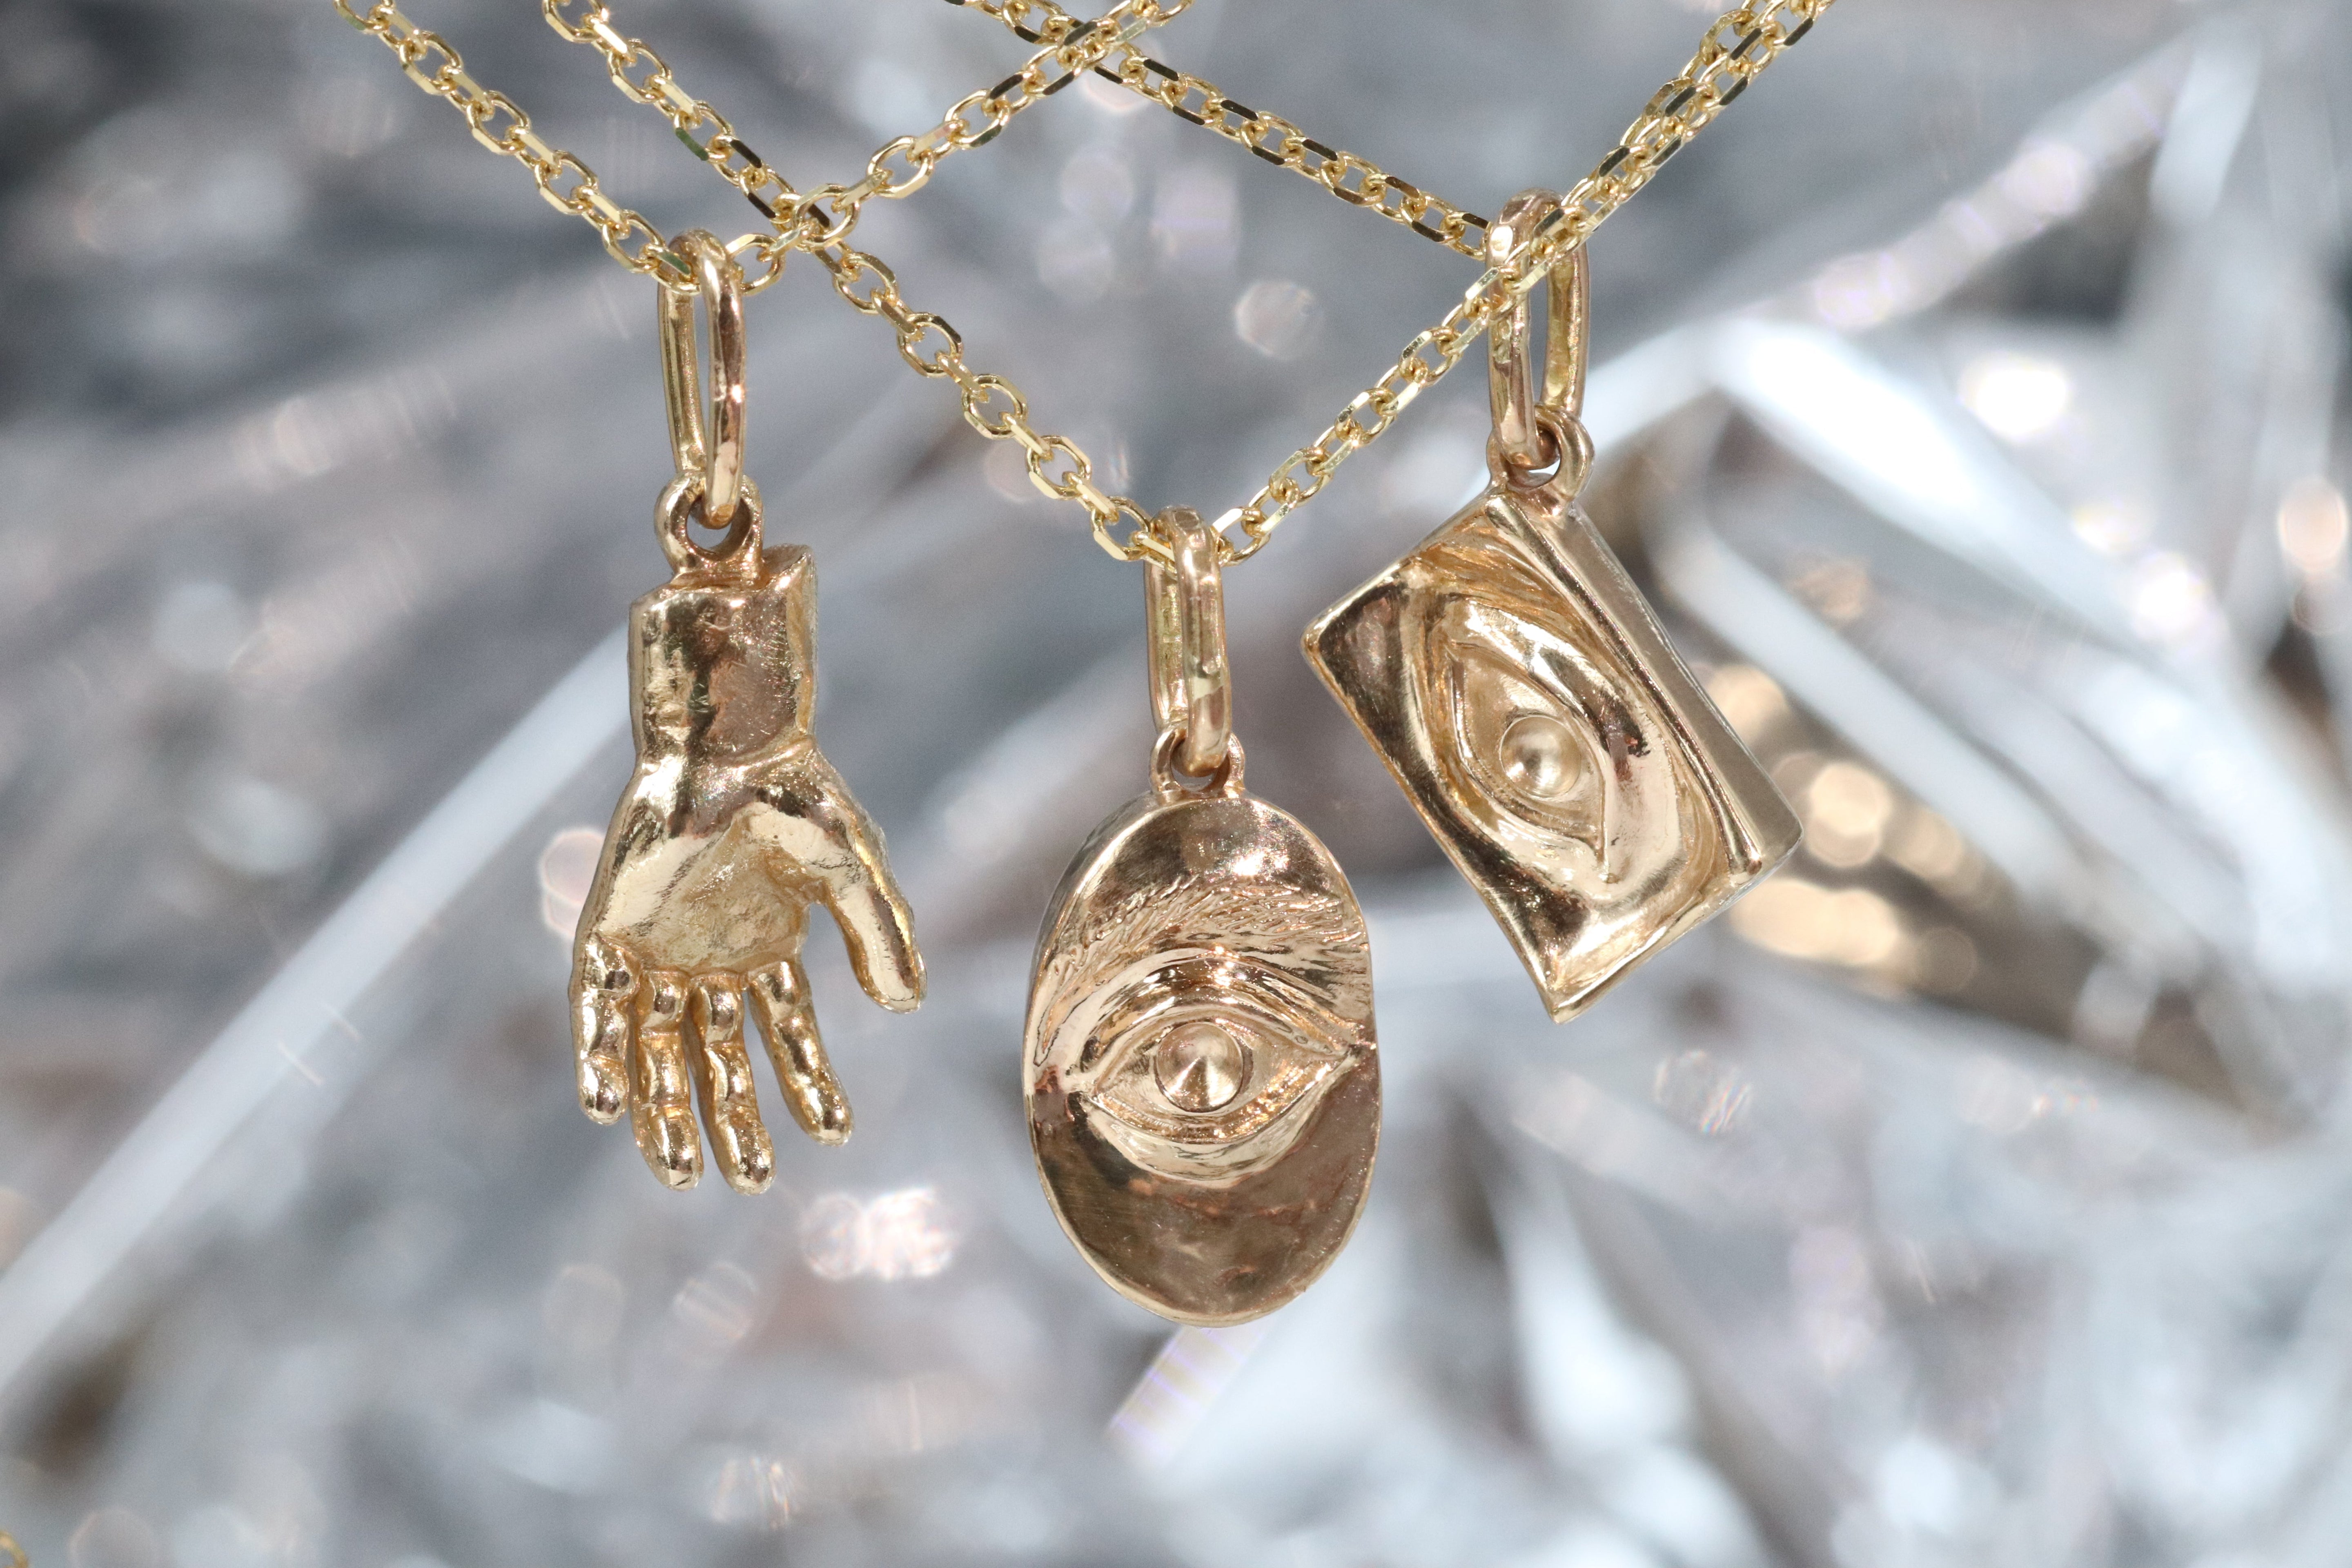 Group shout of Theia Pendant, Intagliuax Oval Pendant, and Intagliuax Pendant